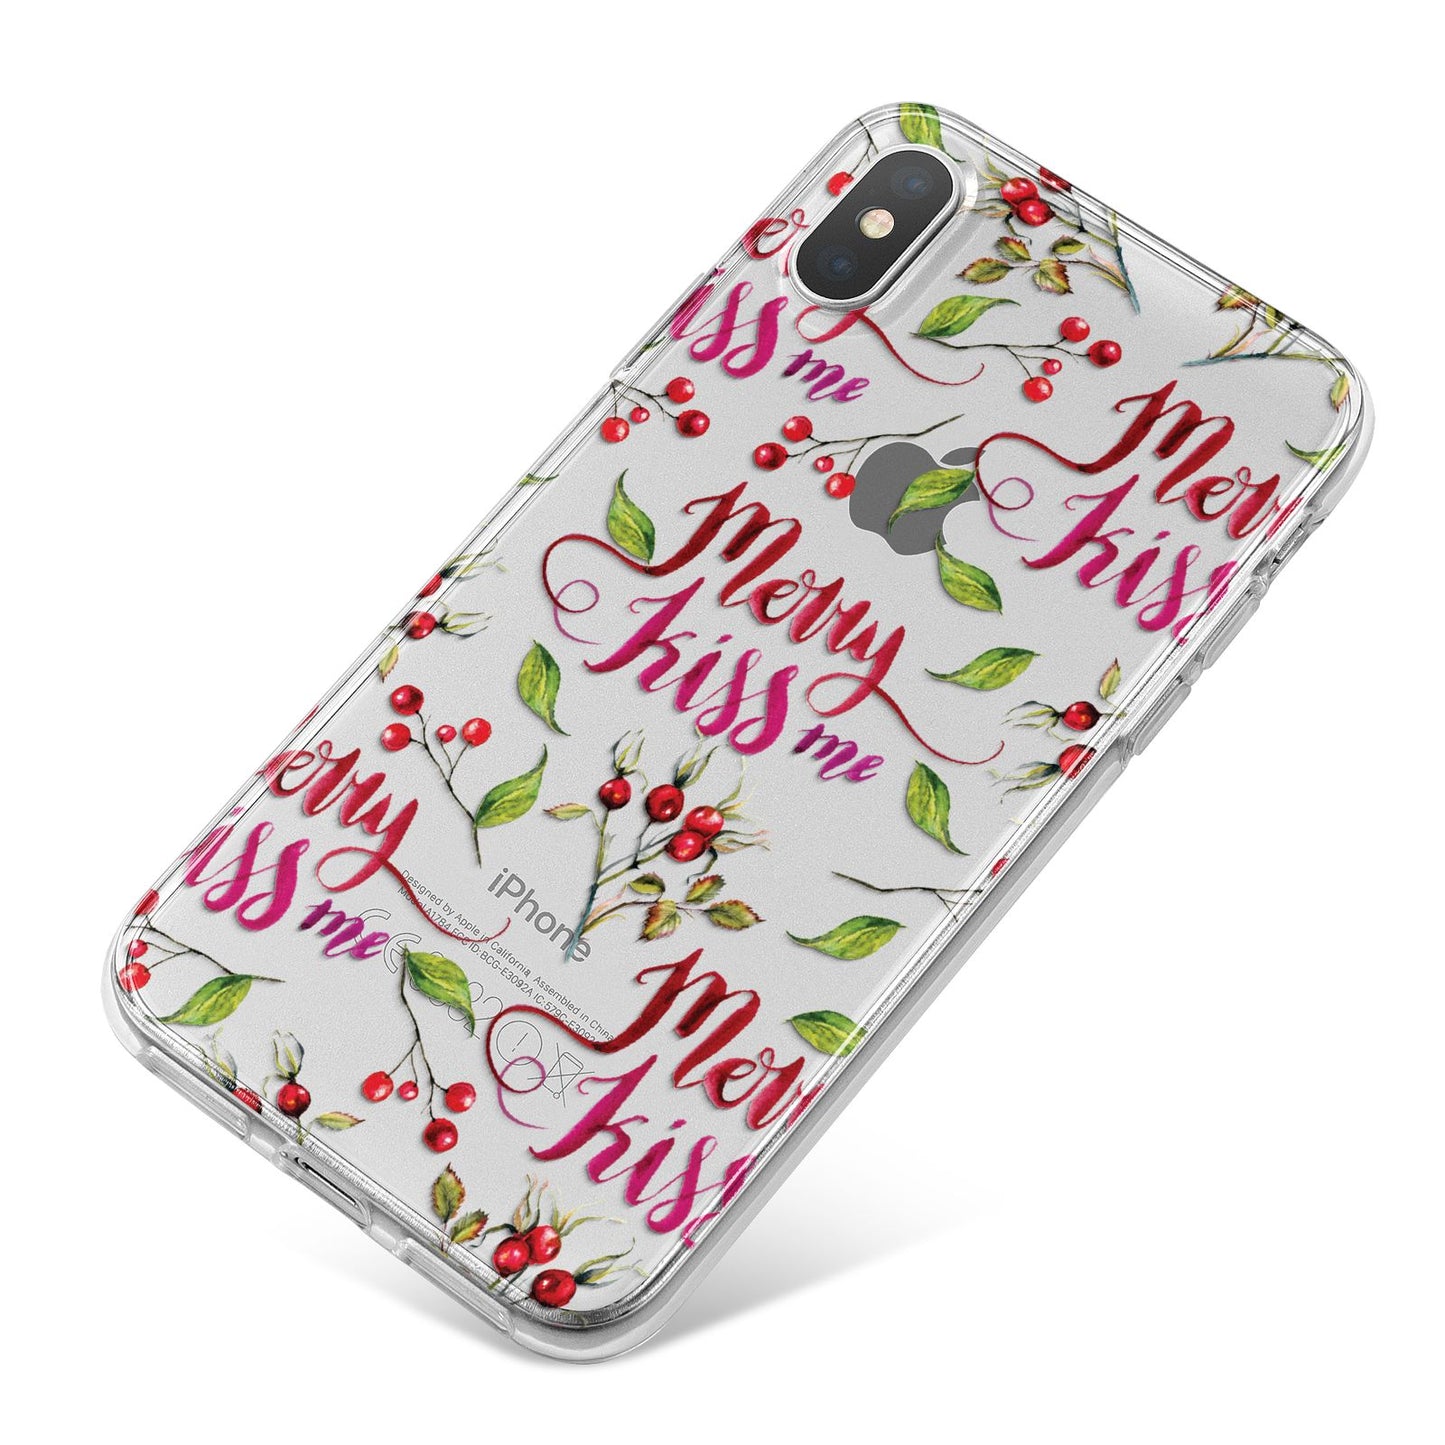 Merry kiss me iPhone X Bumper Case on Silver iPhone